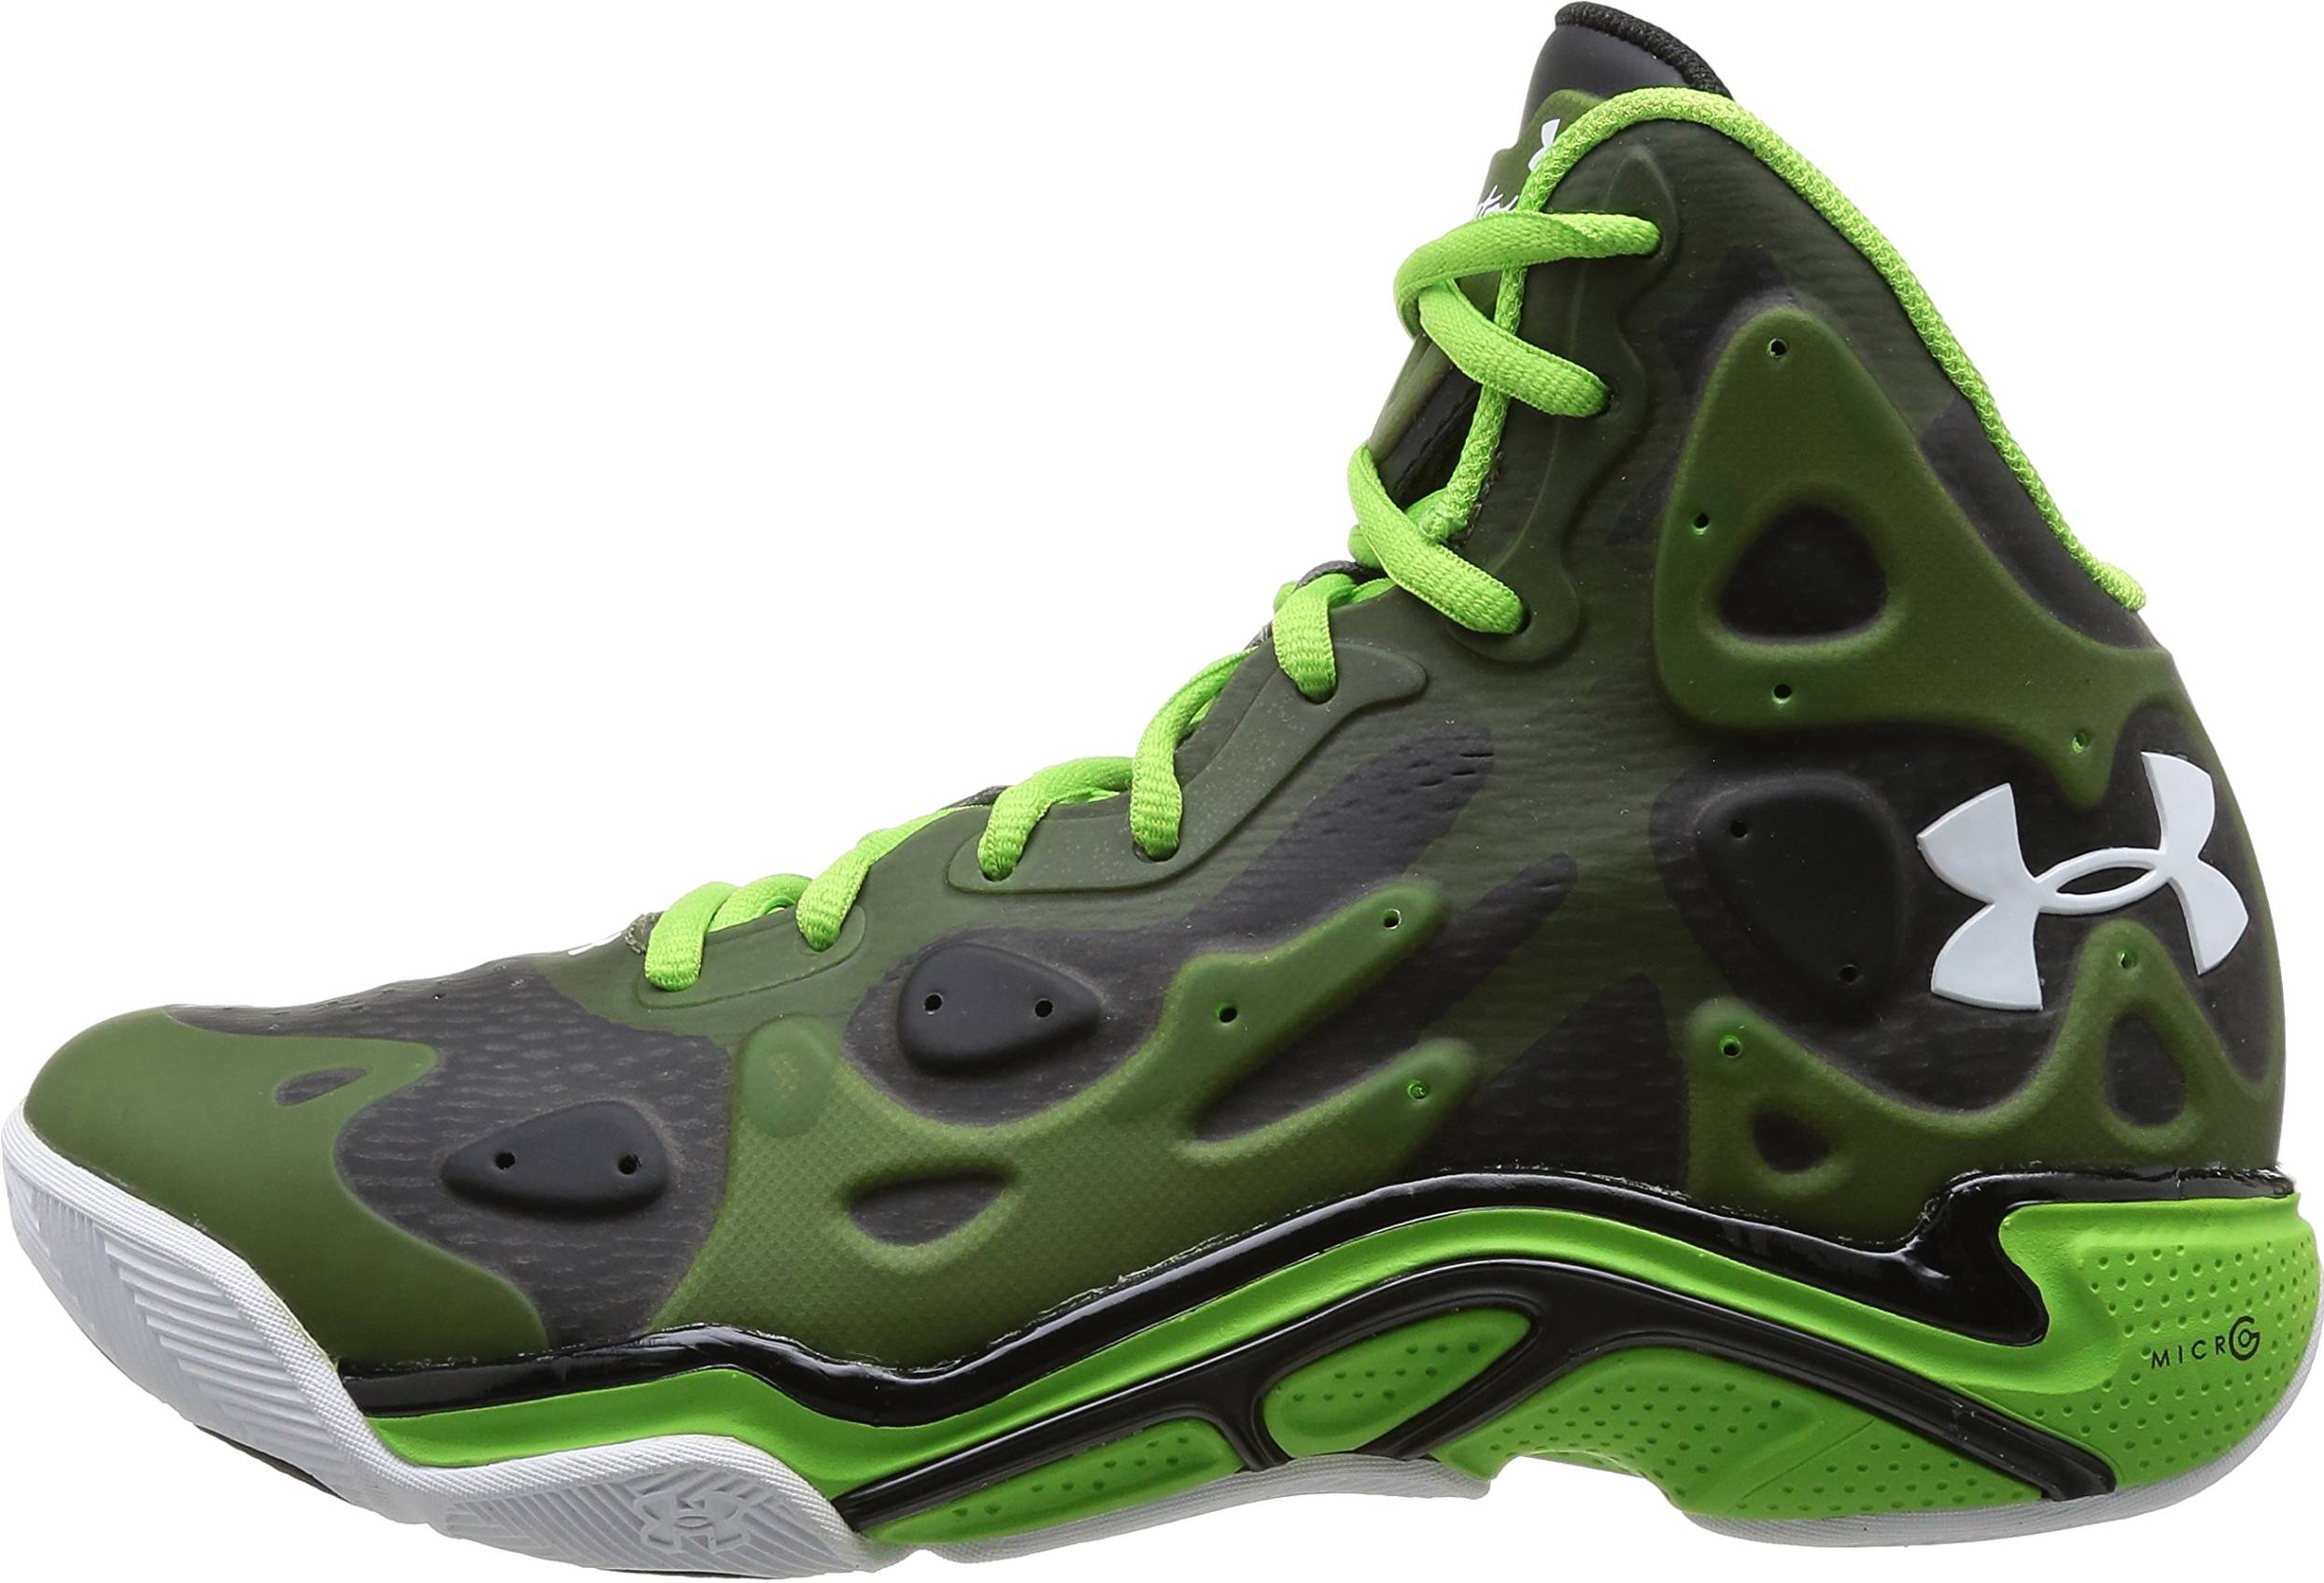 Review of Under Armour Anatomix Spawn 2 